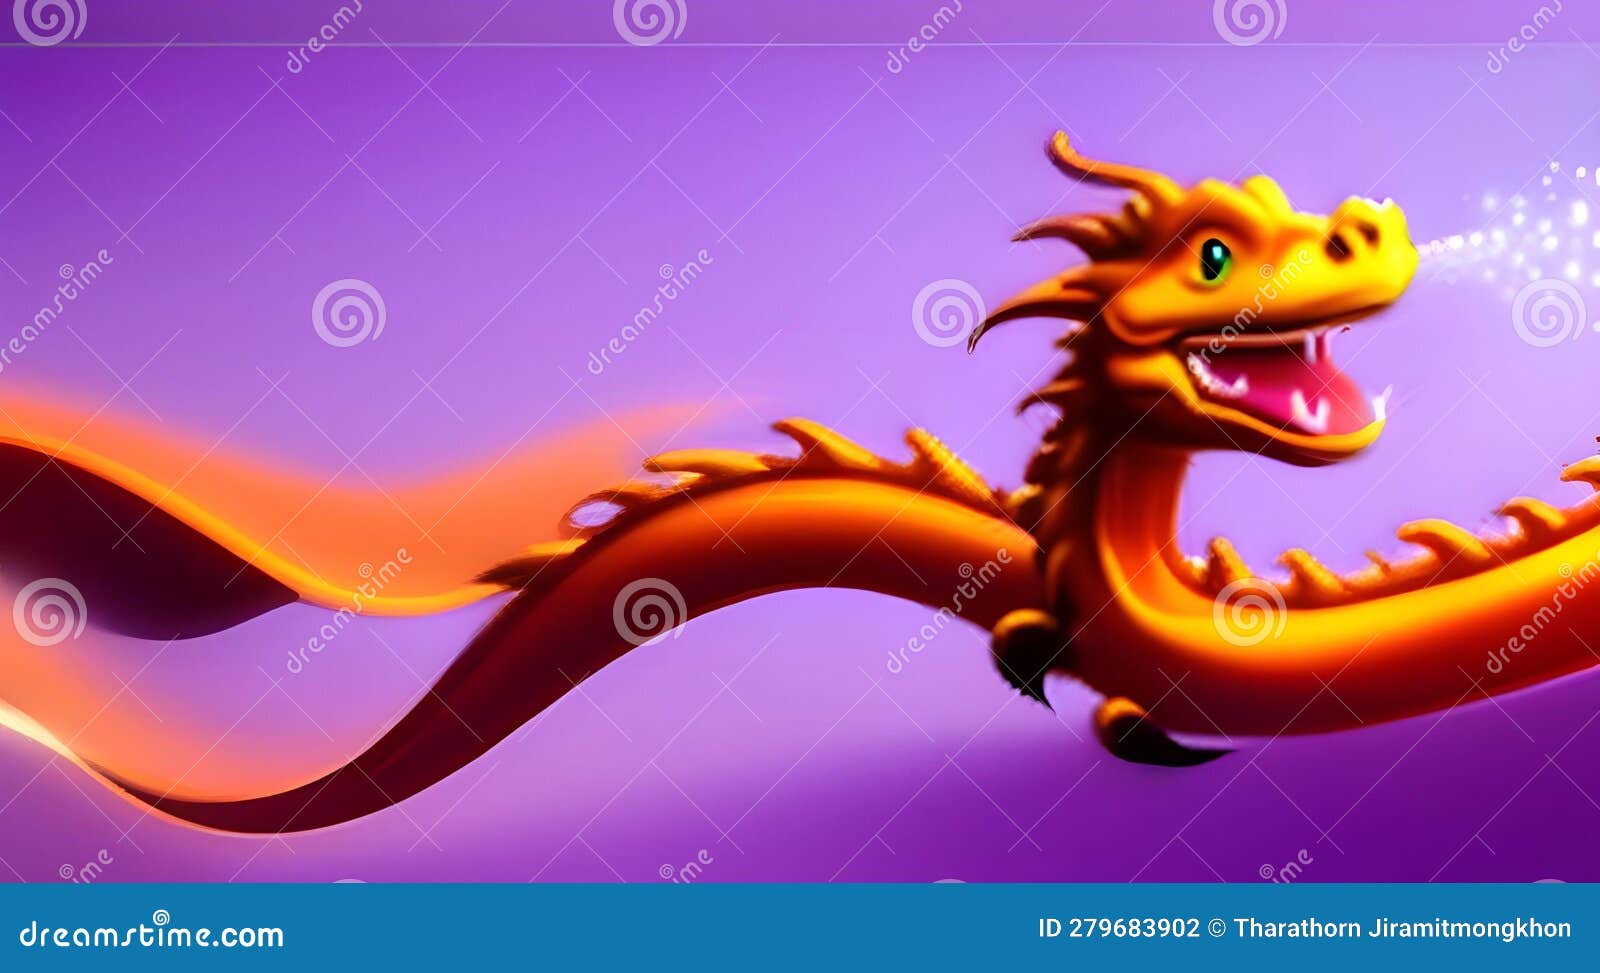 128 Cute Dragon 3d Stock Photos - Free & Royalty-Free Stock Photos from  Dreamstime